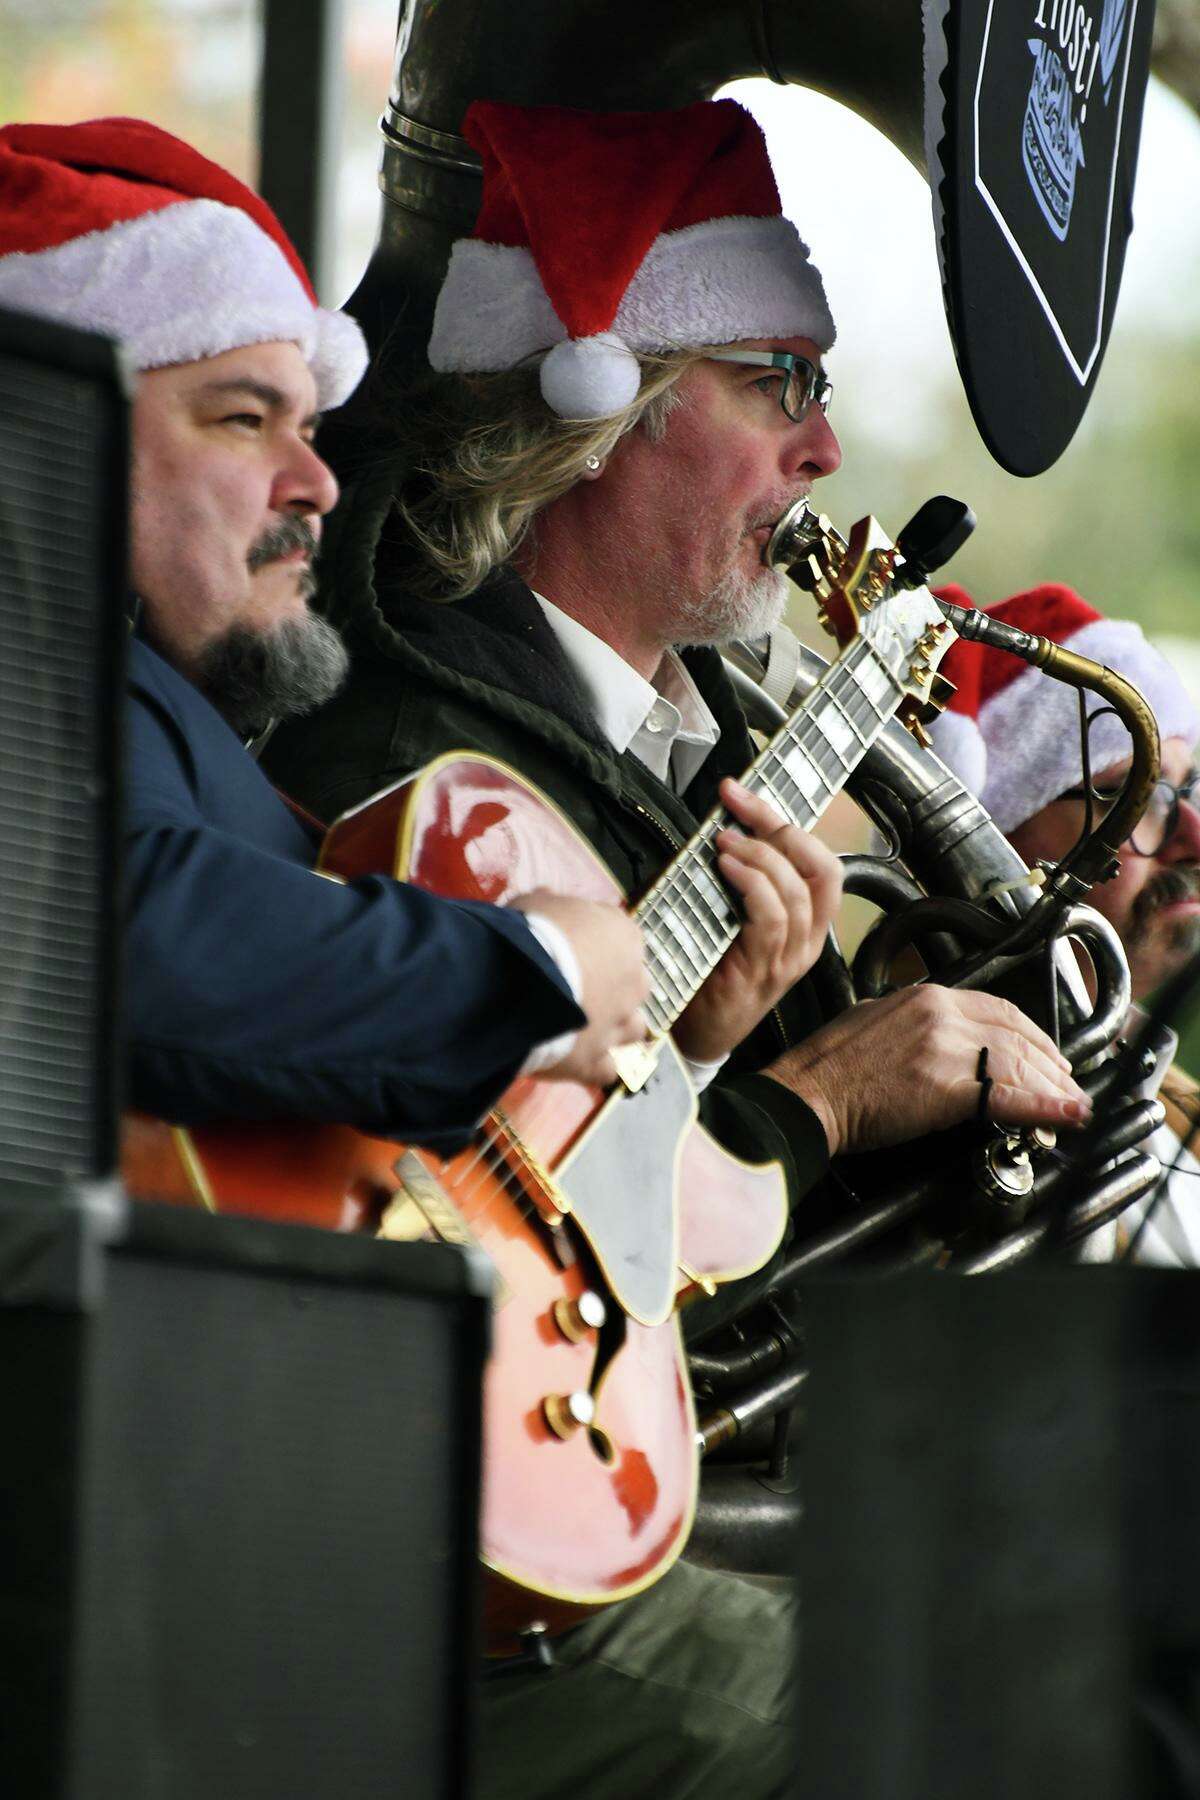 Prost! musicians, including Michael Vitori, from left, and Thomas Helton, serenade guests from the Warsteiner/Ziegenbock Wiesn stage during Tomball's 13th Annual German Christmas Market on Saturday, Dec. 11, 2021.